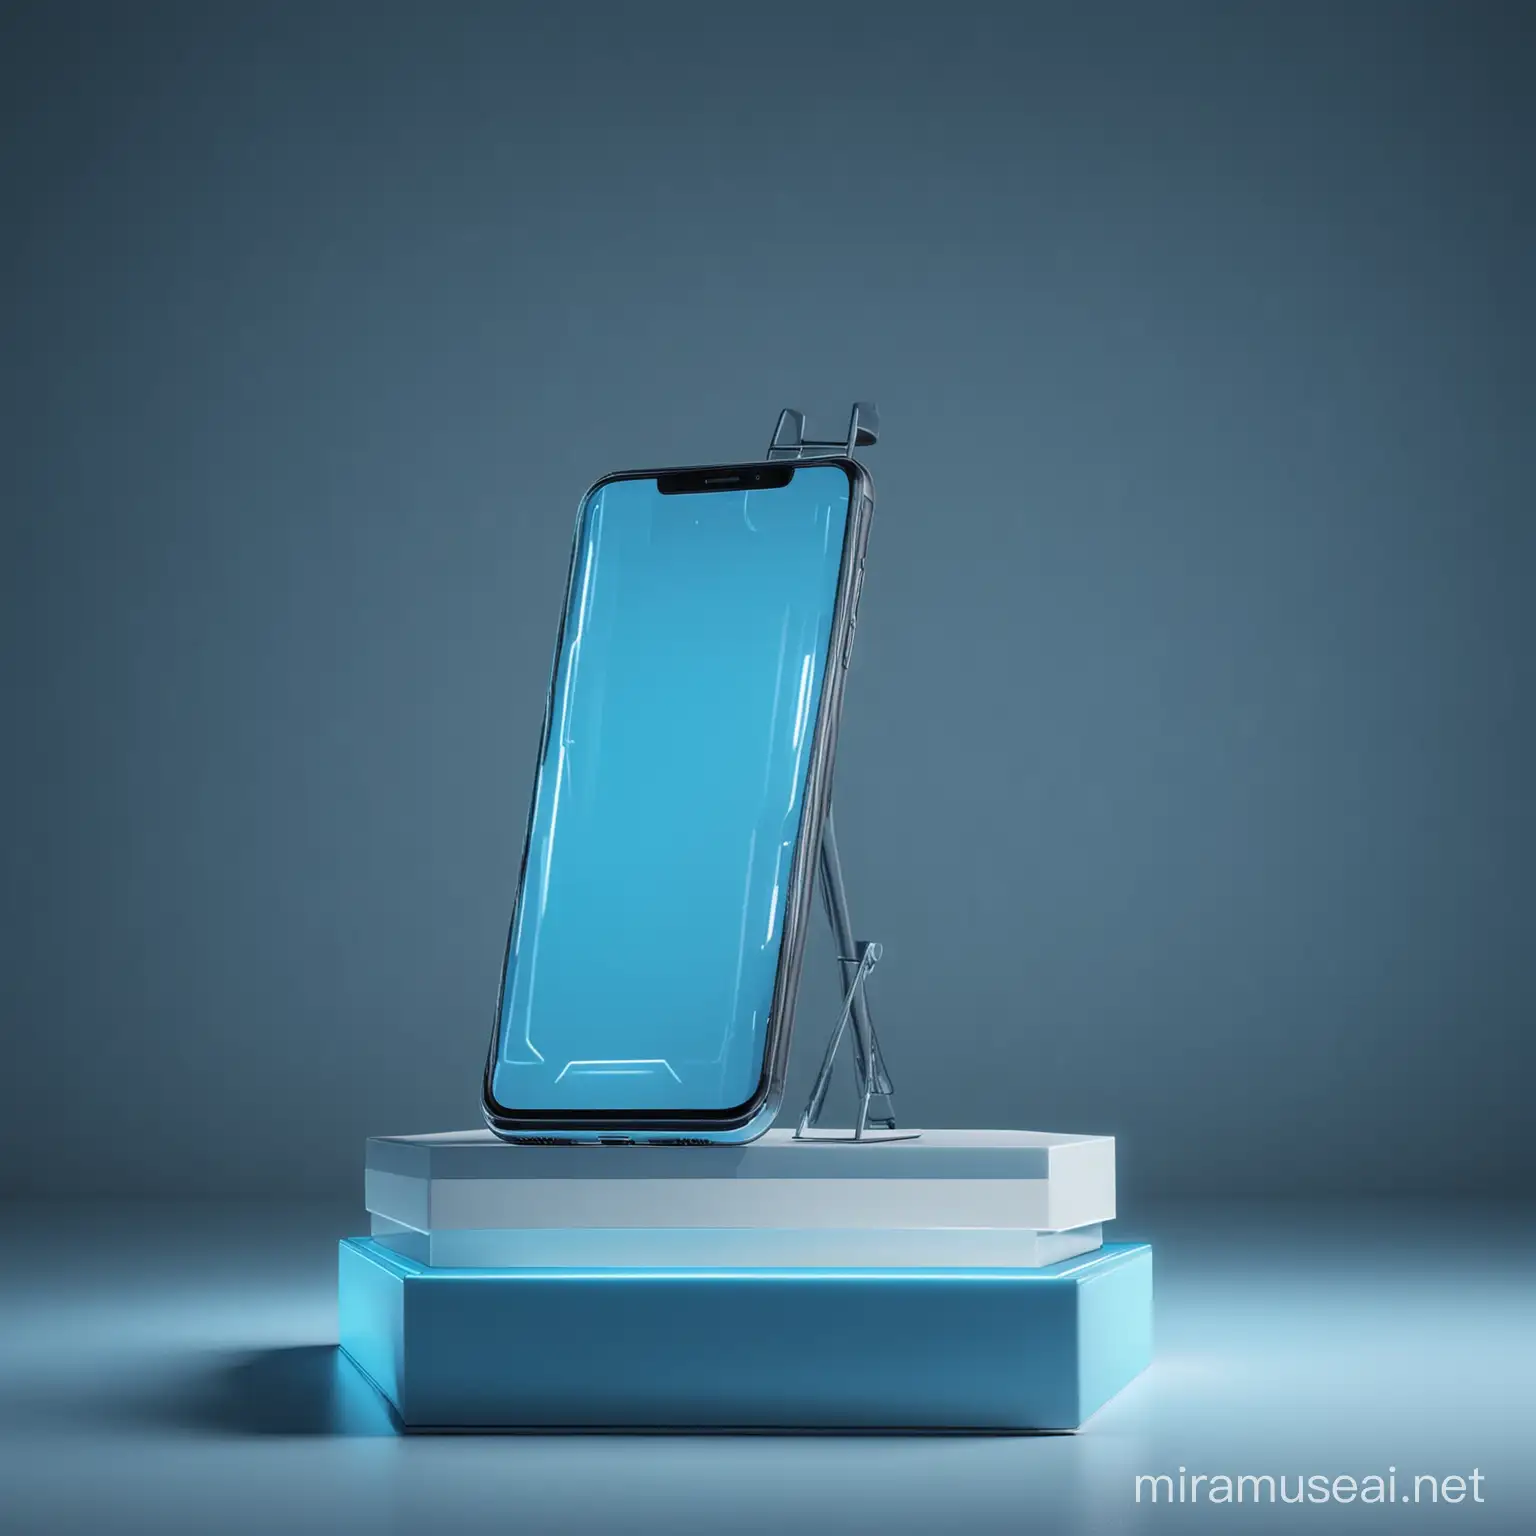 Smartphone on podium in empty blue scene with diagonal blue line neon lamps on background. Smartphone  with neon elements